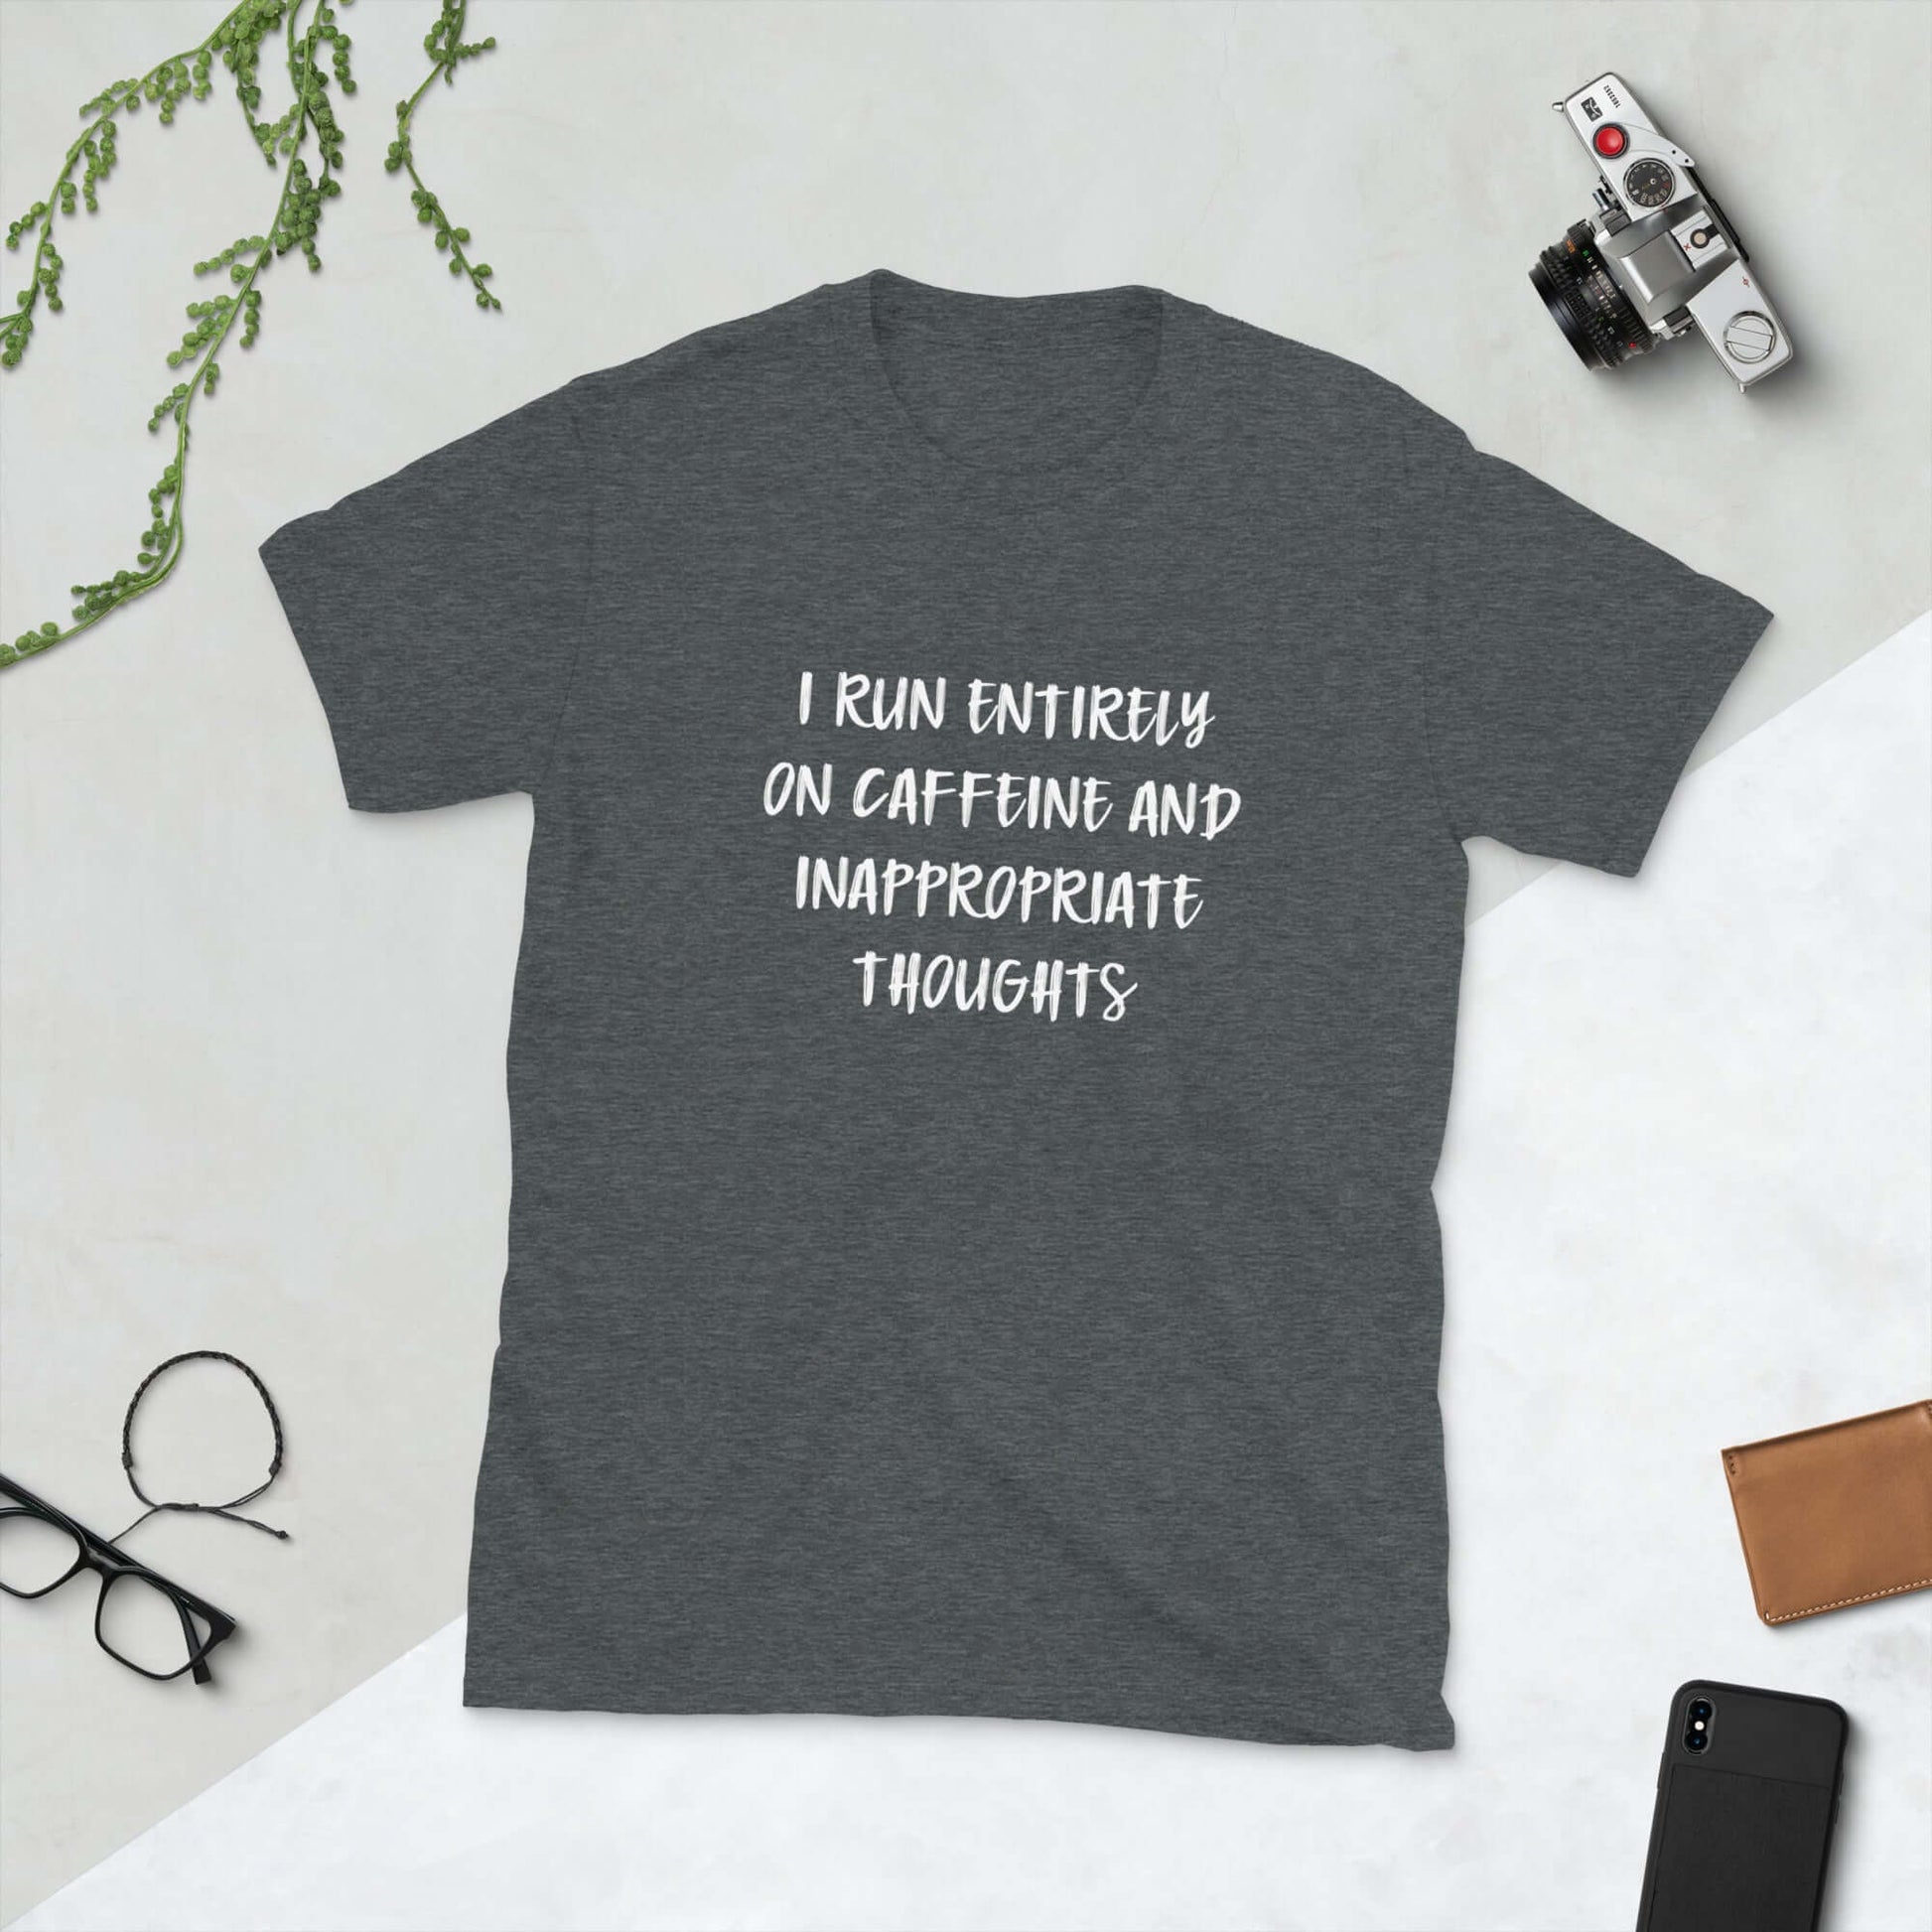 Dark heather grey t-shirt with the words I run entirely on caffeine & inappropriate thoughts printed on the front.